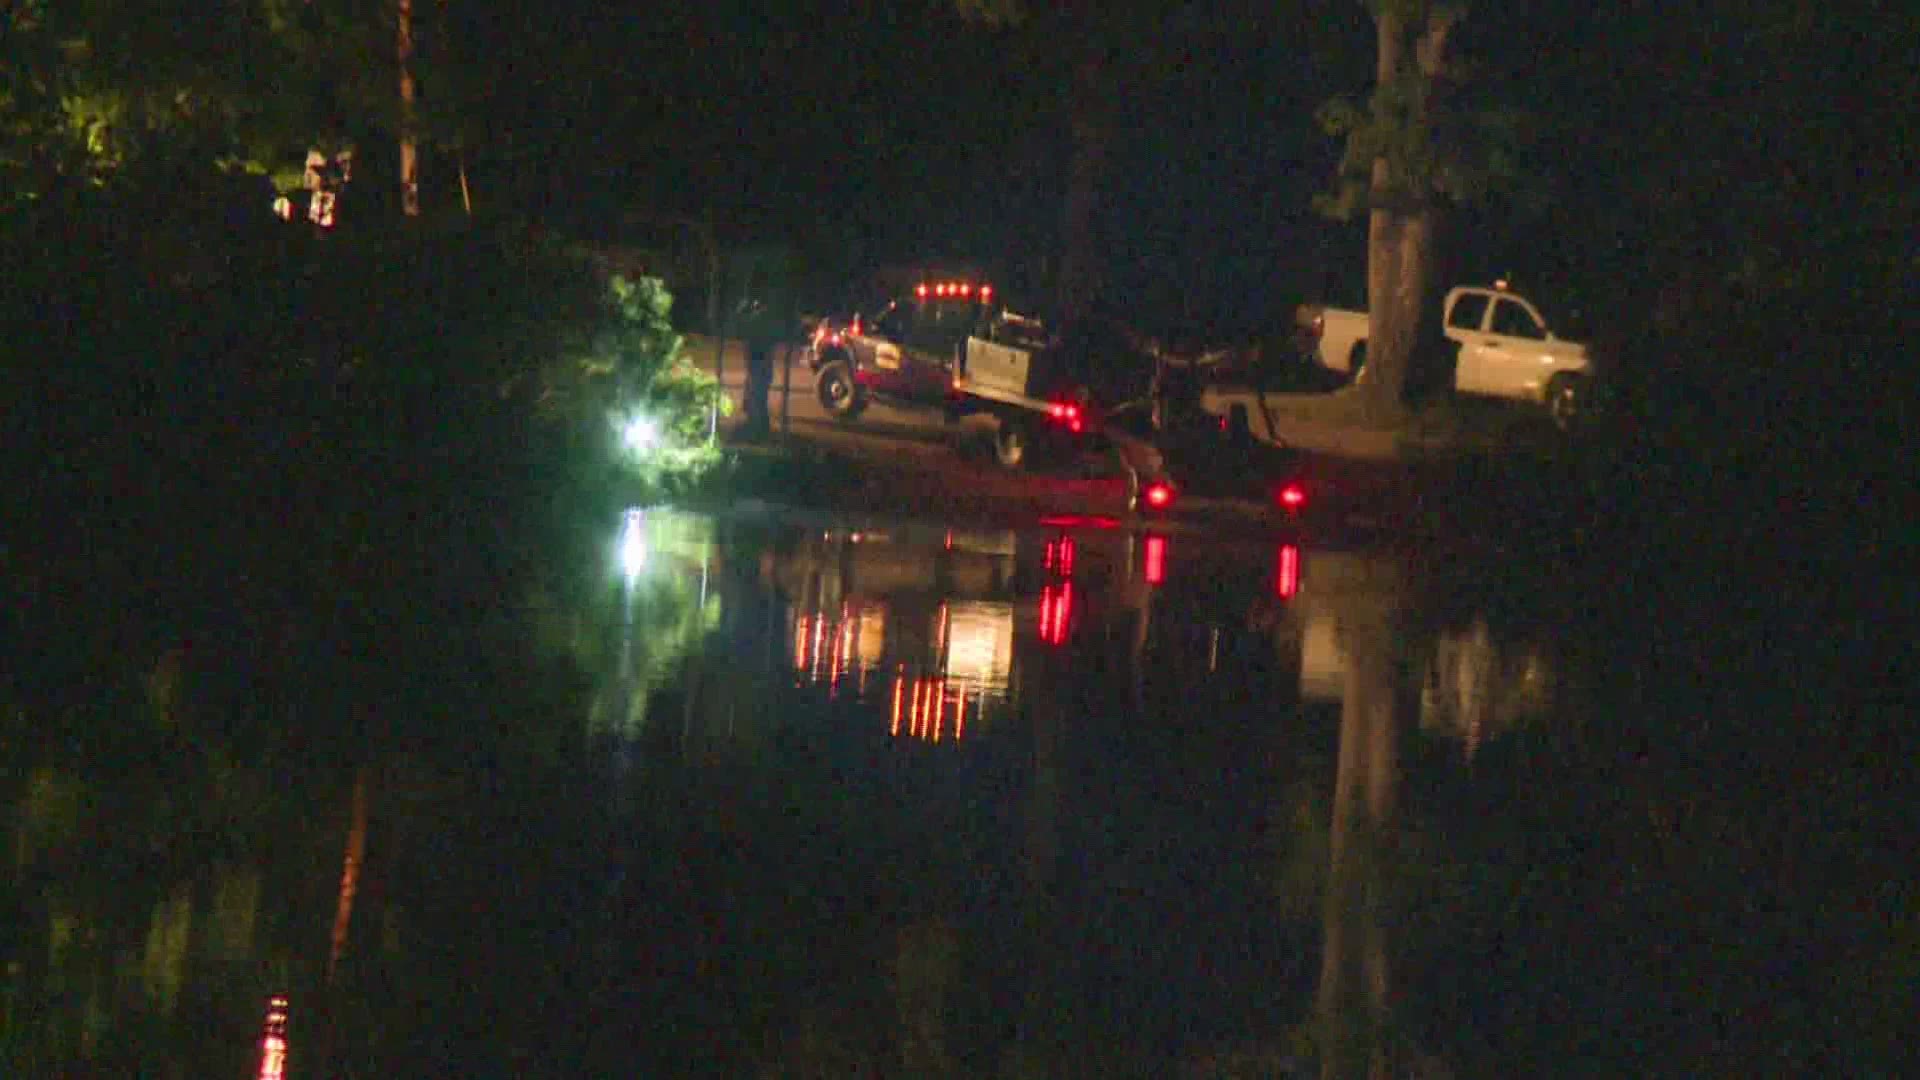 Search crews find kayaker safe on Muskegon County lake